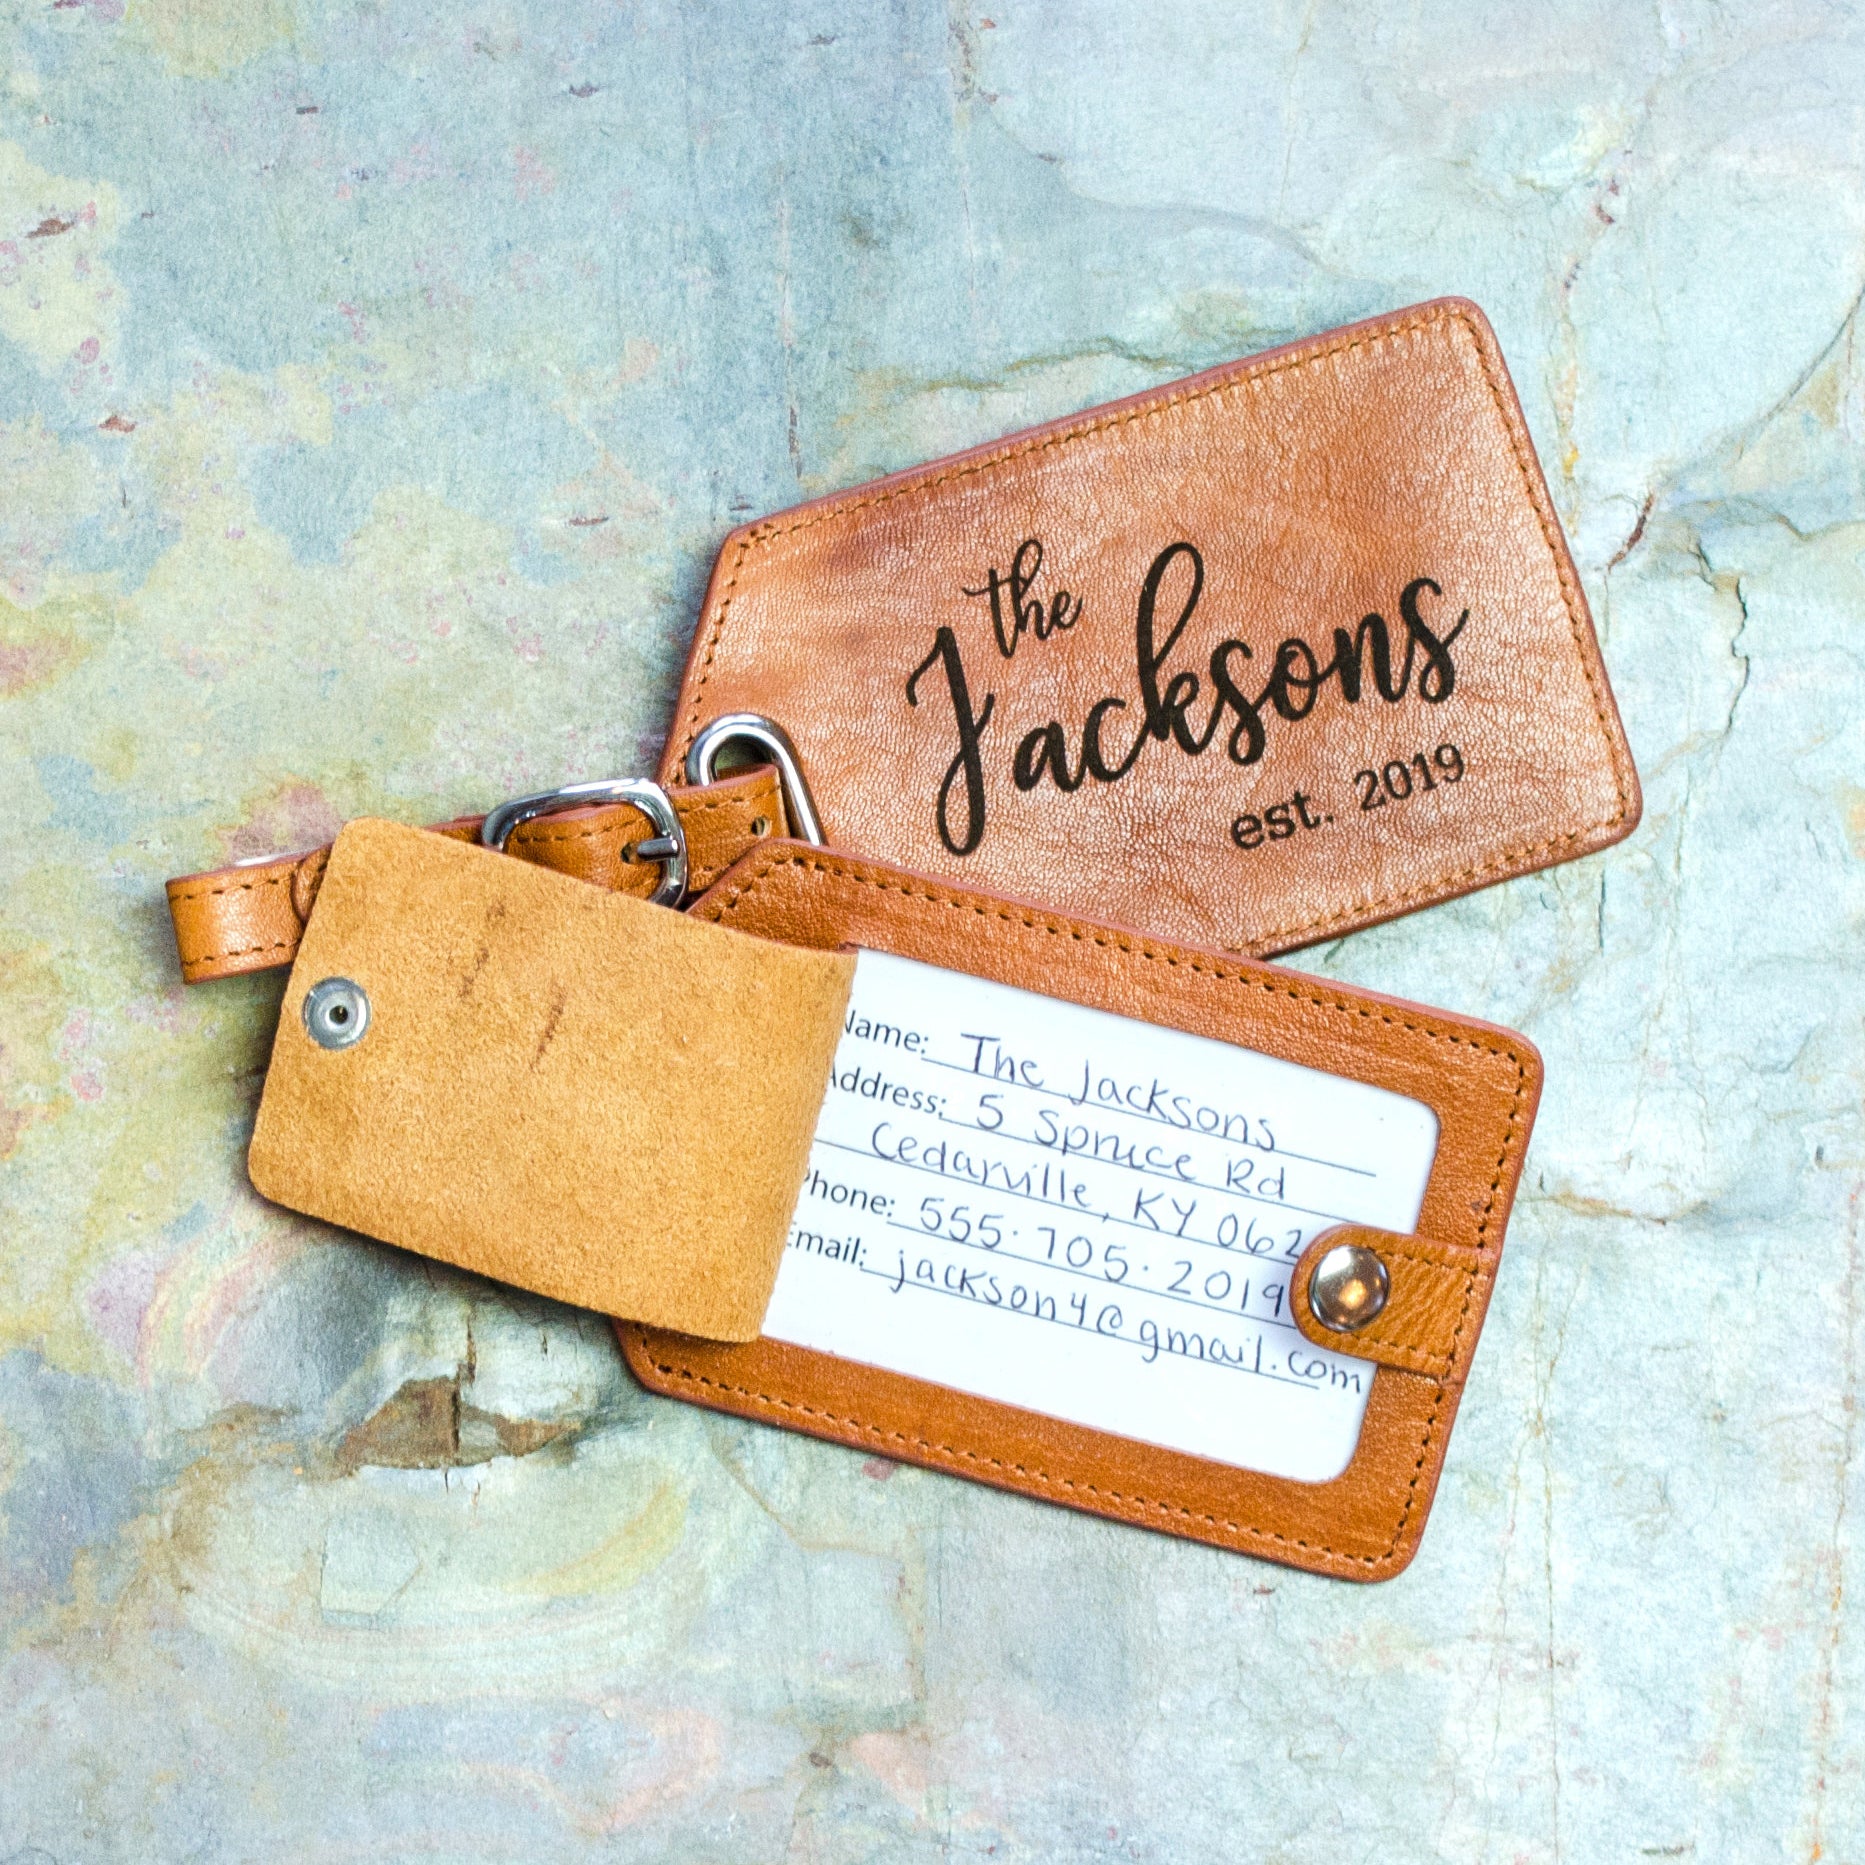 Personalized leather luggage tag with monogram - Brute Handcraft